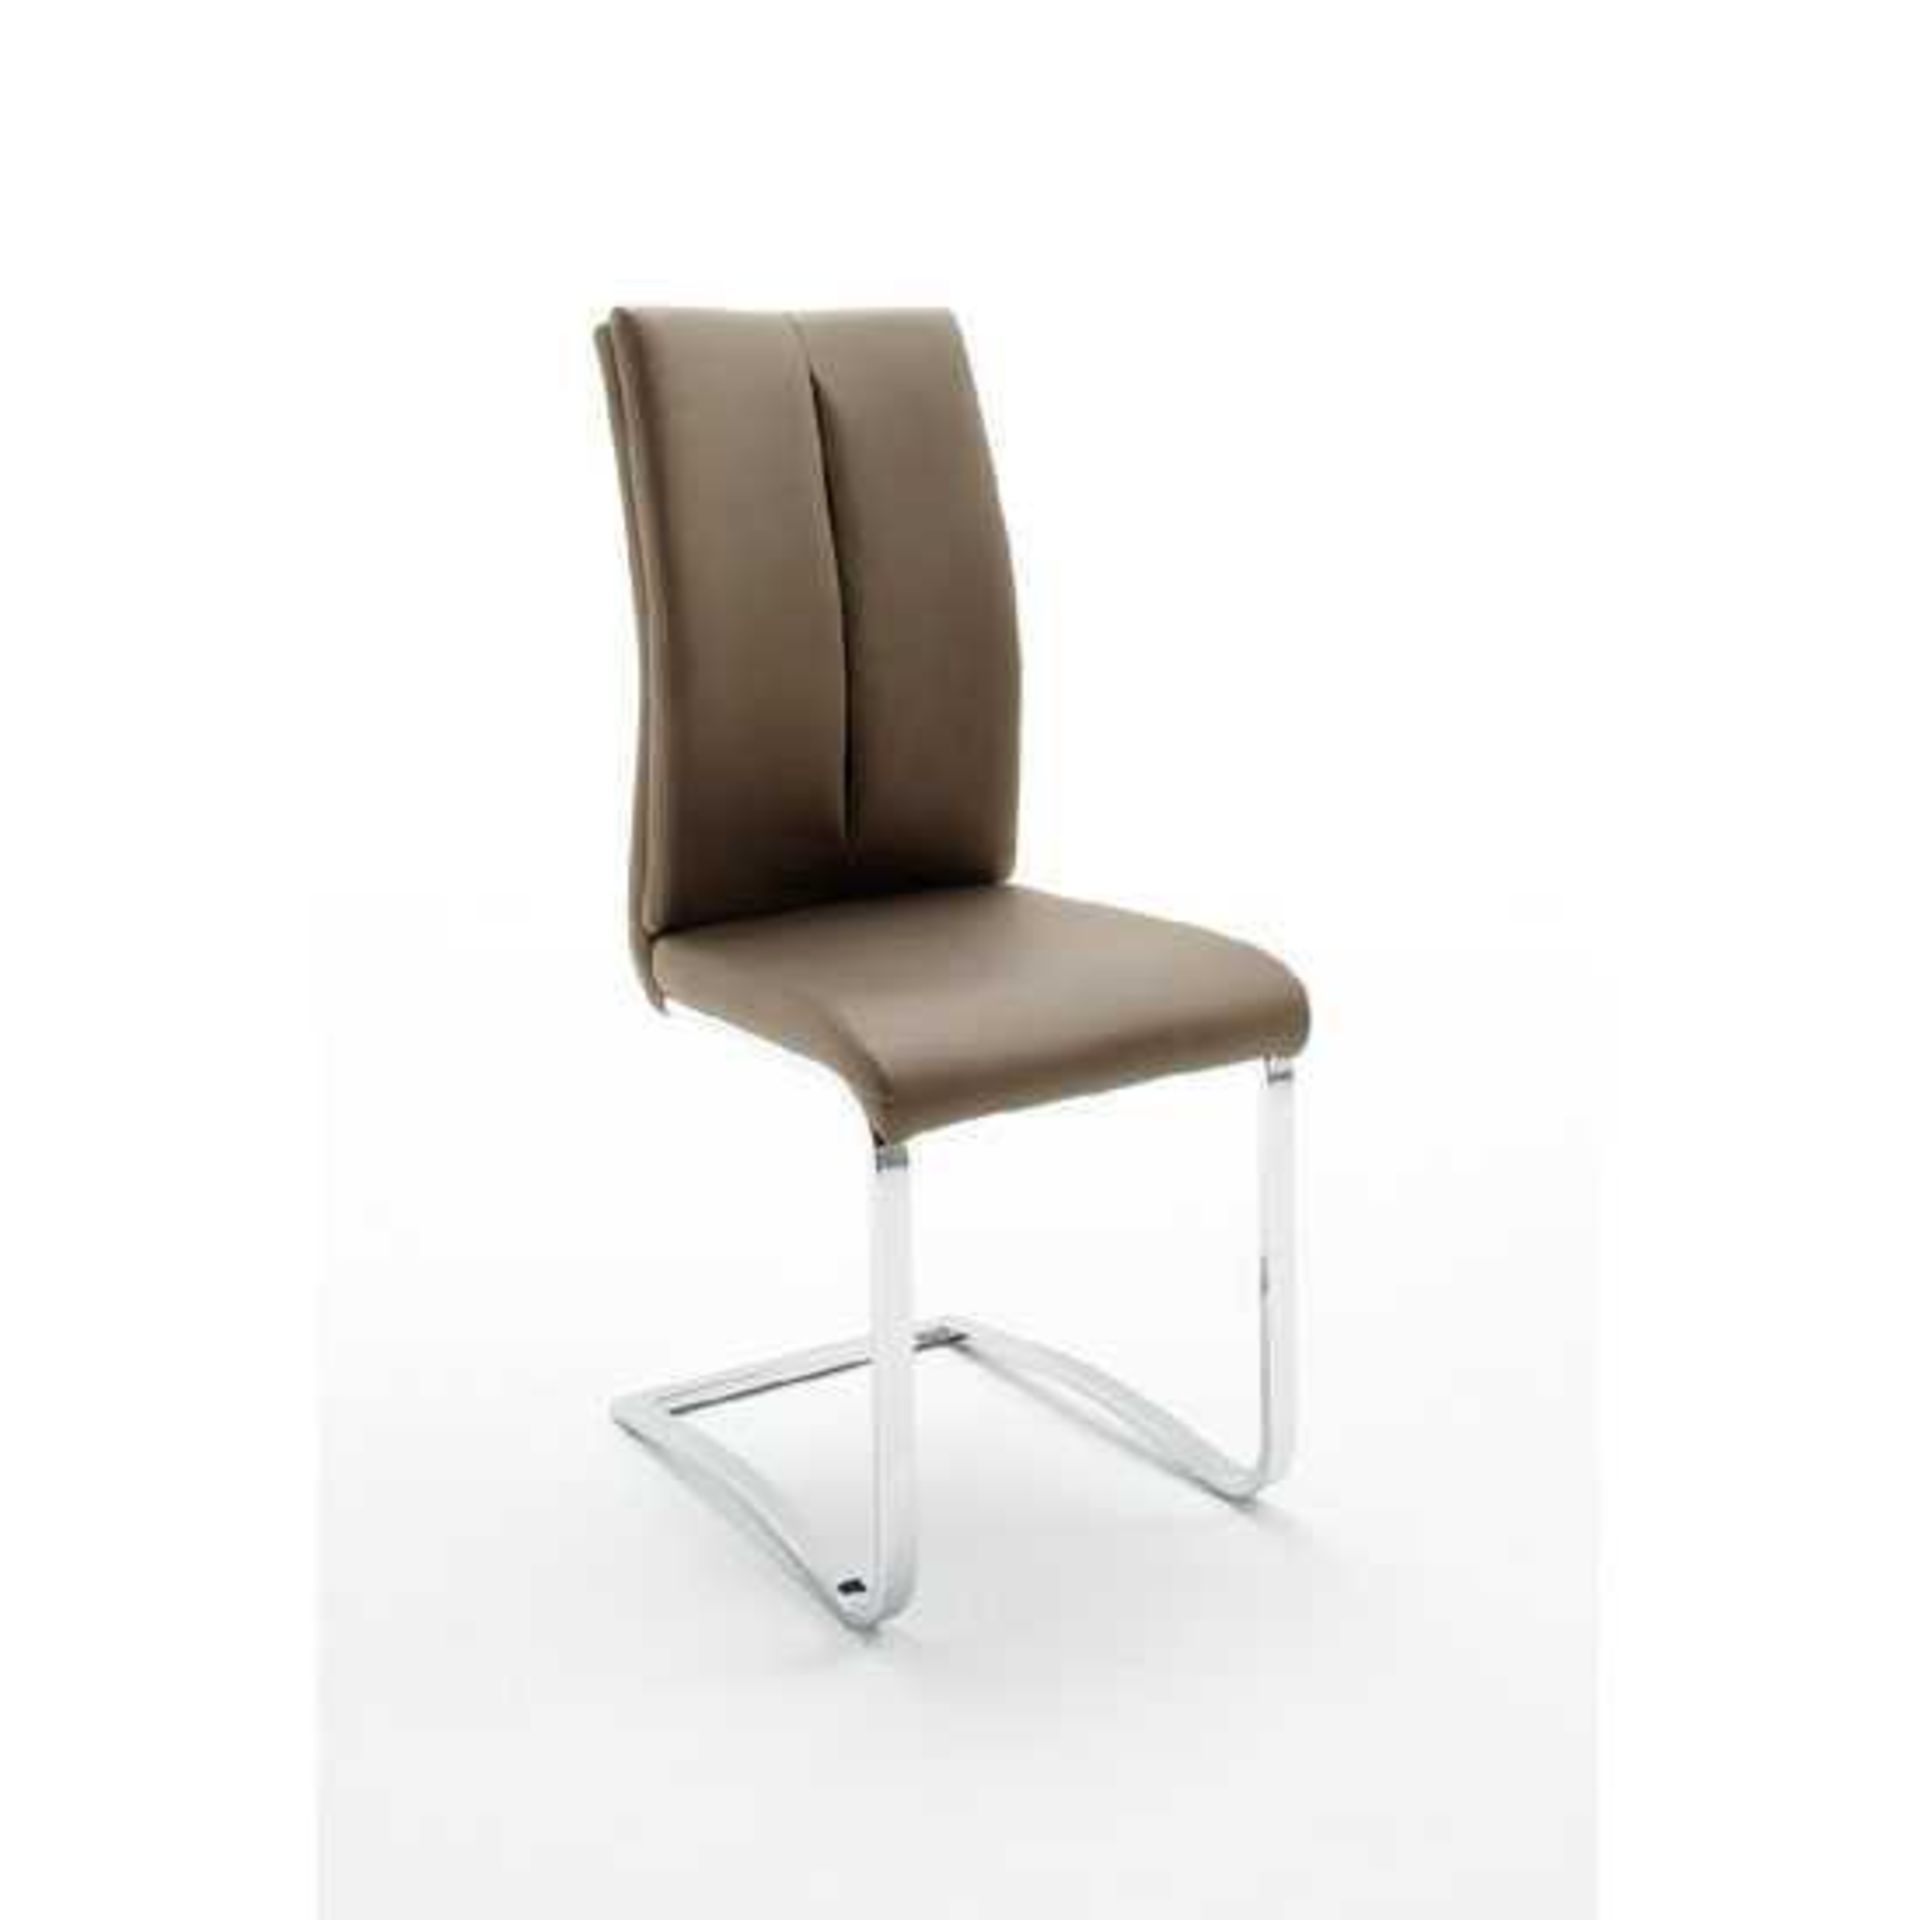 RRP £200 - Boxed 2 'Tavis' Cappuccino Dining Chairs (Appraisals Available On Request) (Pictures